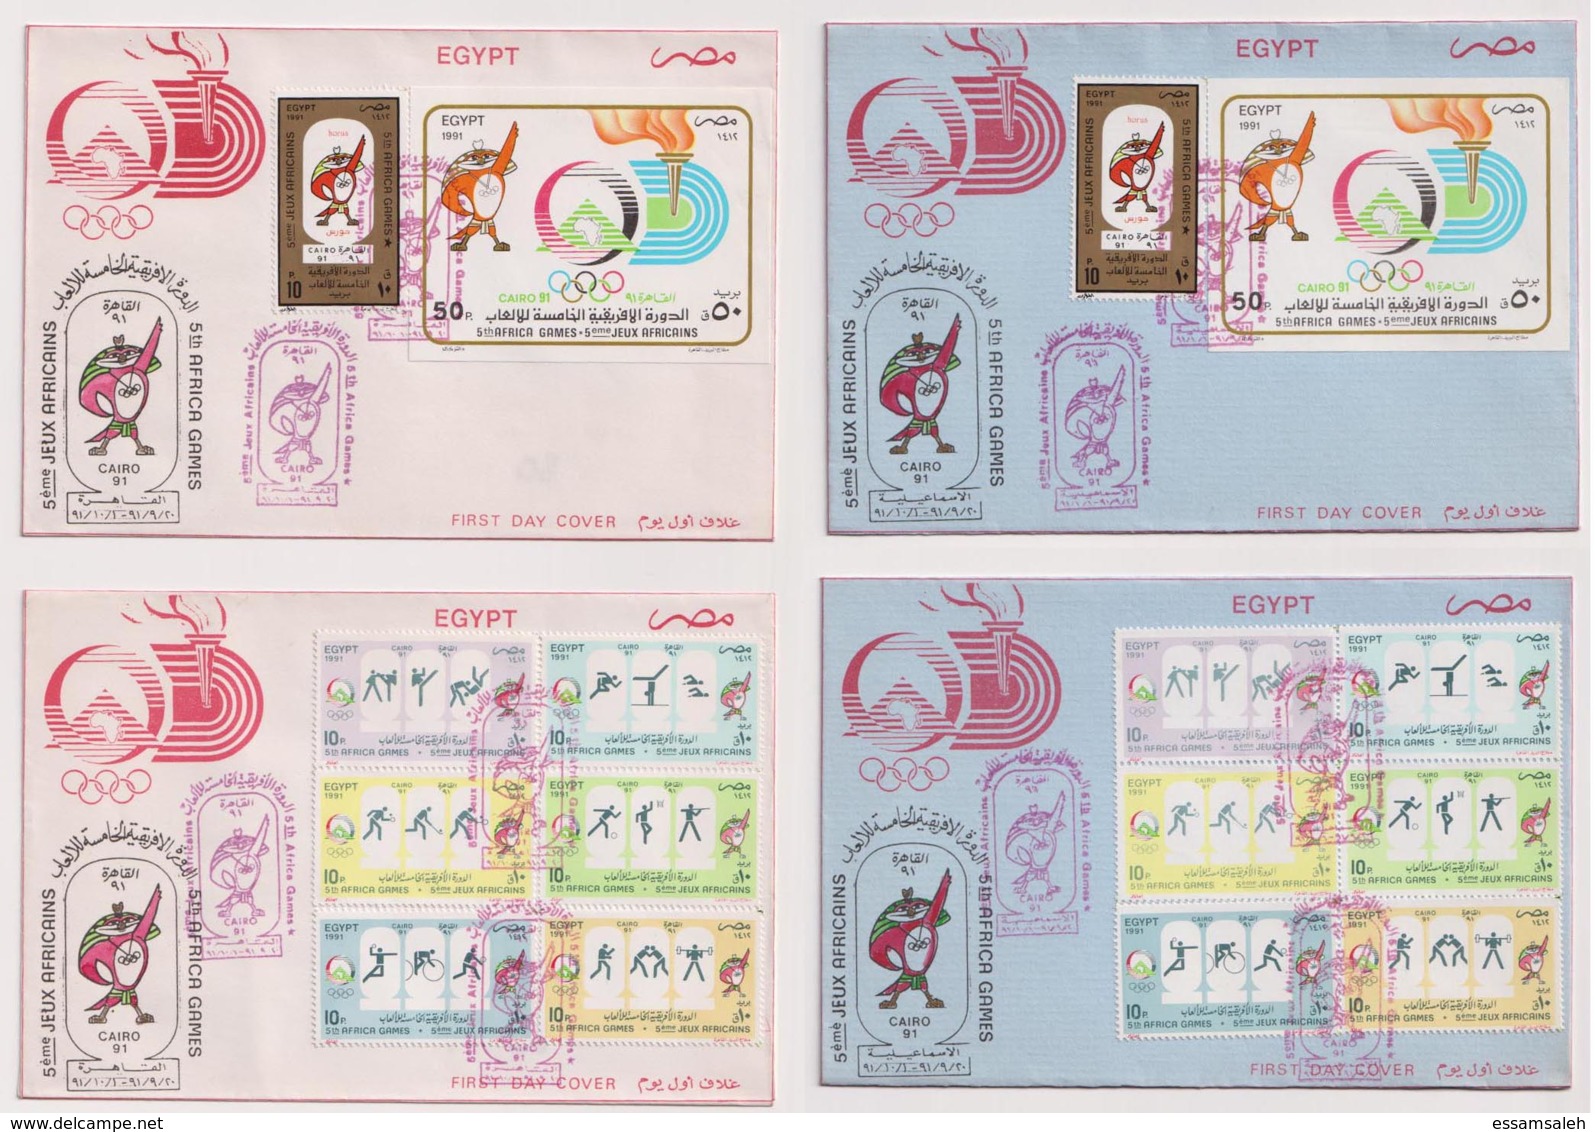 EGS30753 Egypt 1991 5th AFRICAN GAMES IN CAIRO / Rare Ismailia CDS / FDC & Cairo CDS - Covers & Documents